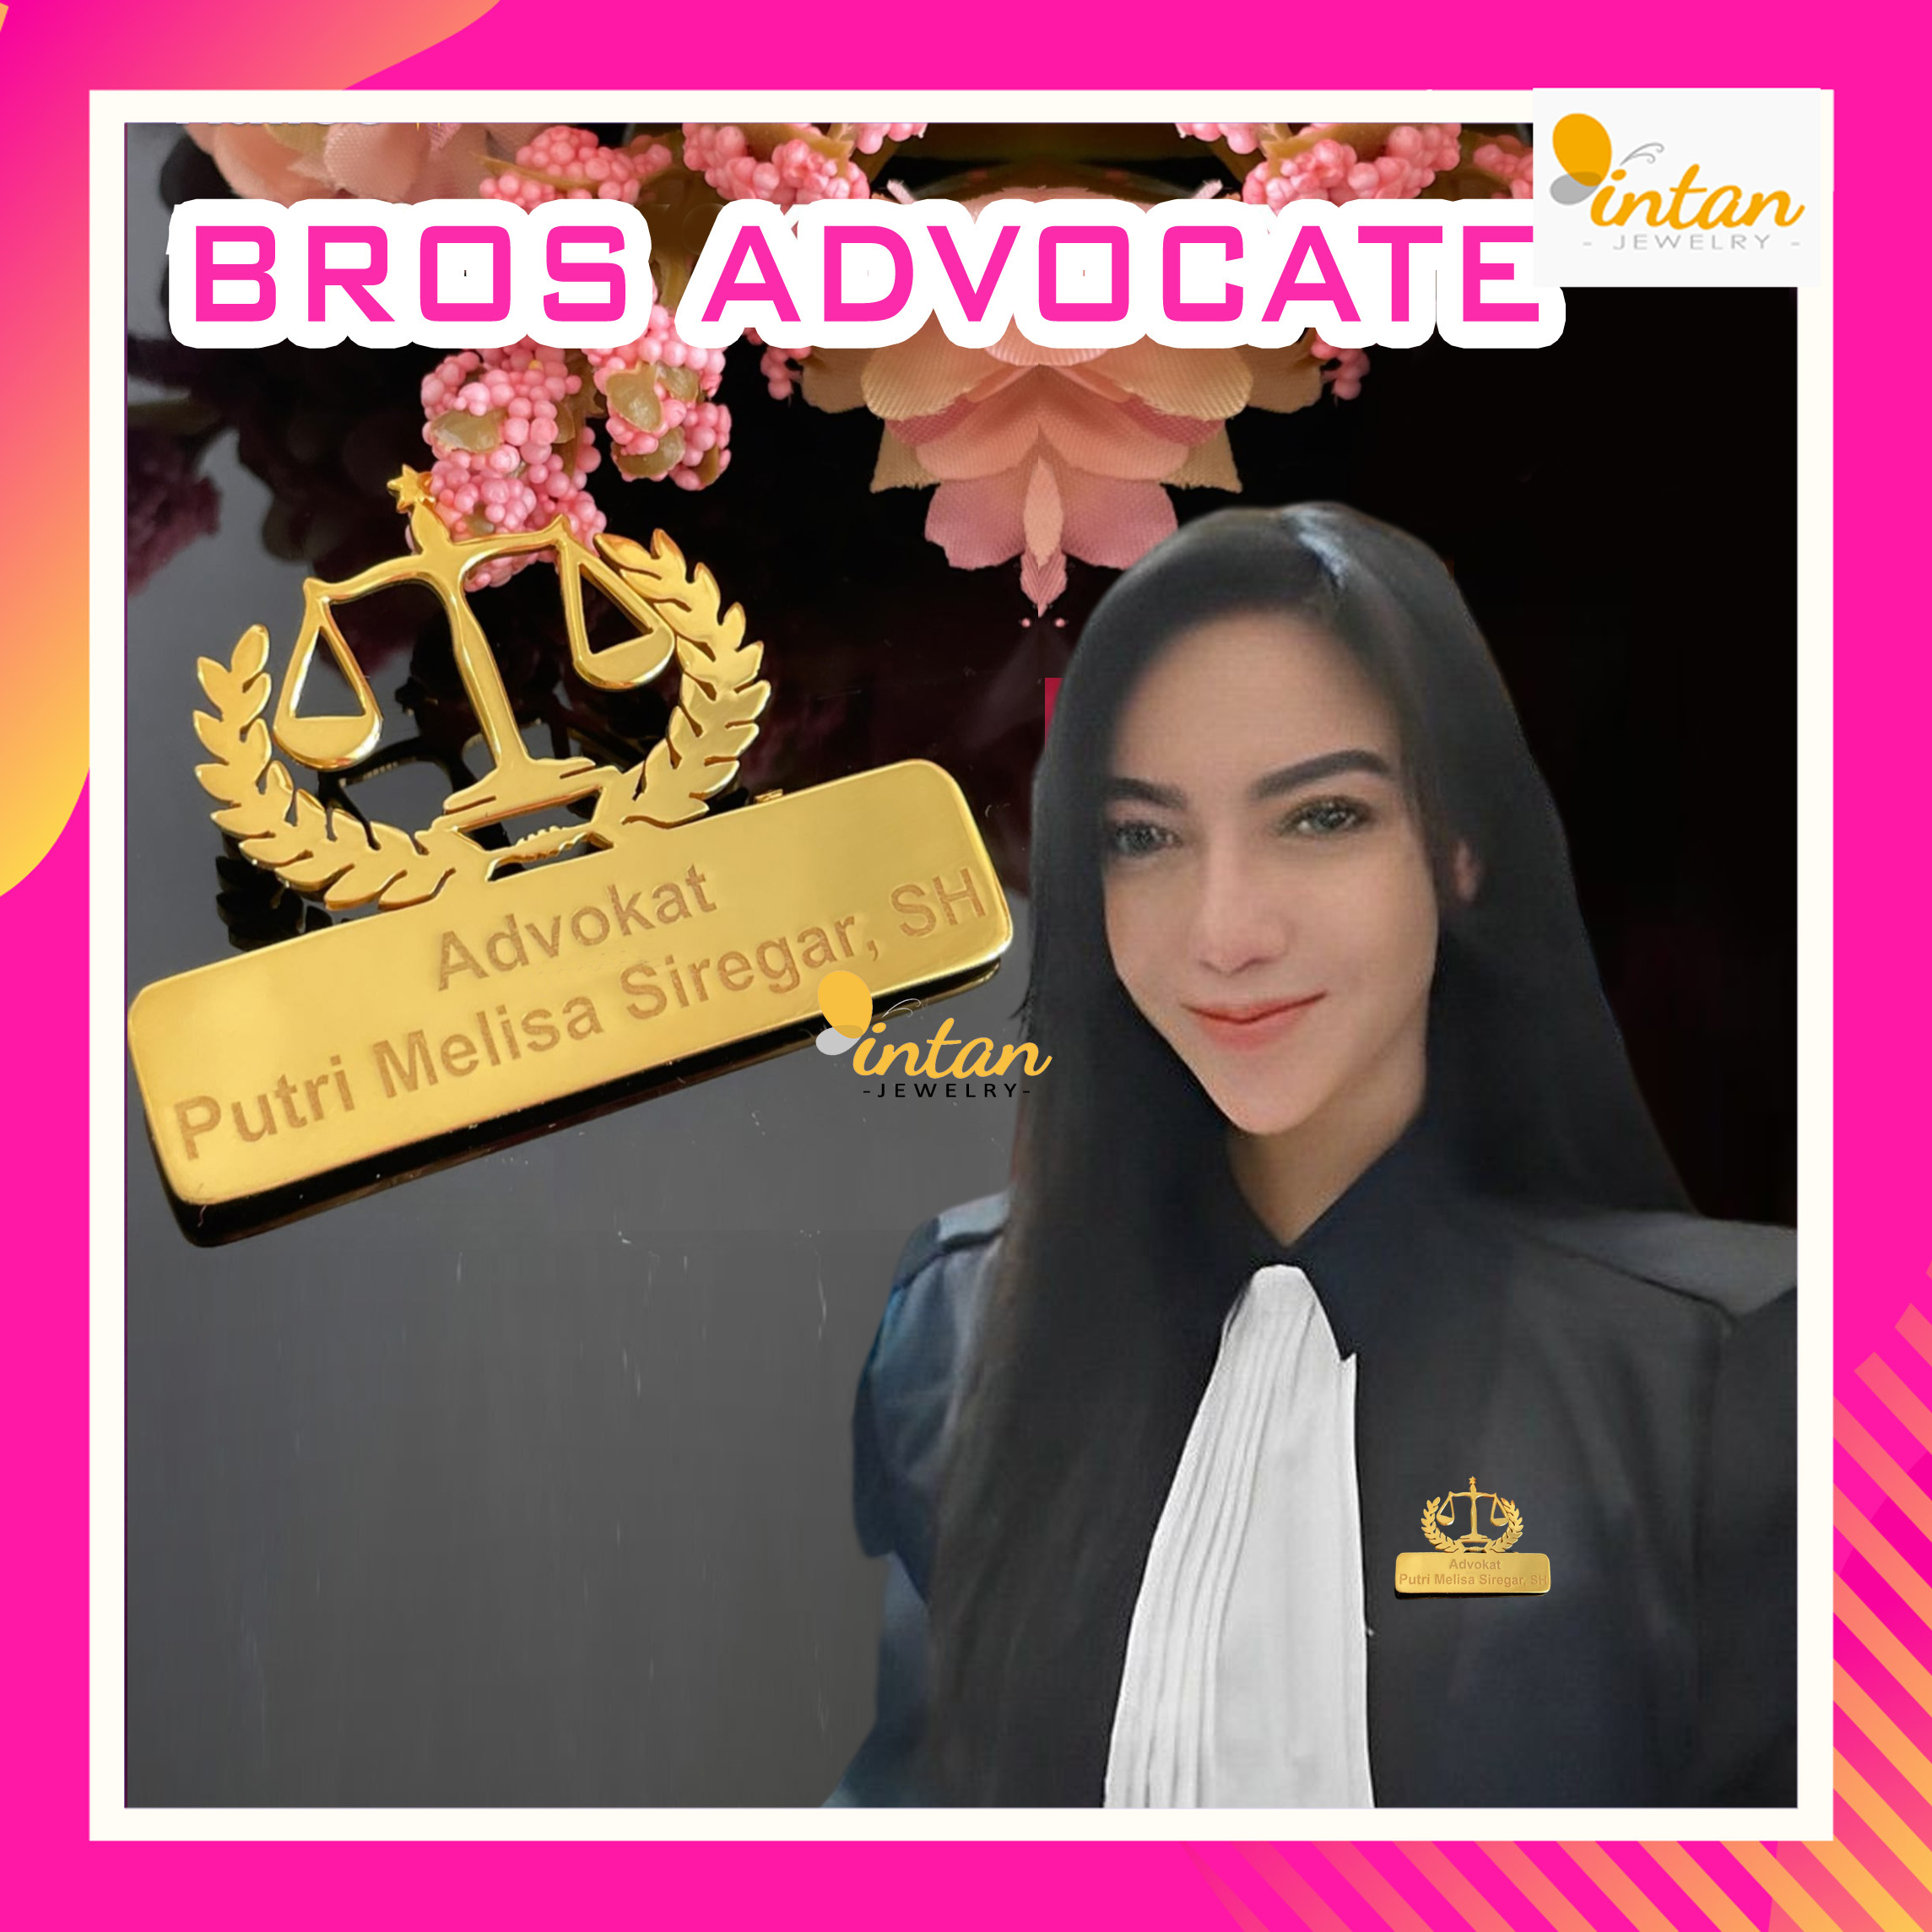 Brooch Advocate Name Bross Advocate Brooch Custom Name Lawyer Bachelor Of Law Logo Court Law Symbol Scales Pen Feather Pin Hijab Goddess Of Justice TItanium Plated Genuine Gold SIlver Gold Rosegold Notary Kenotariatan Fashion Accessories Women Hijab